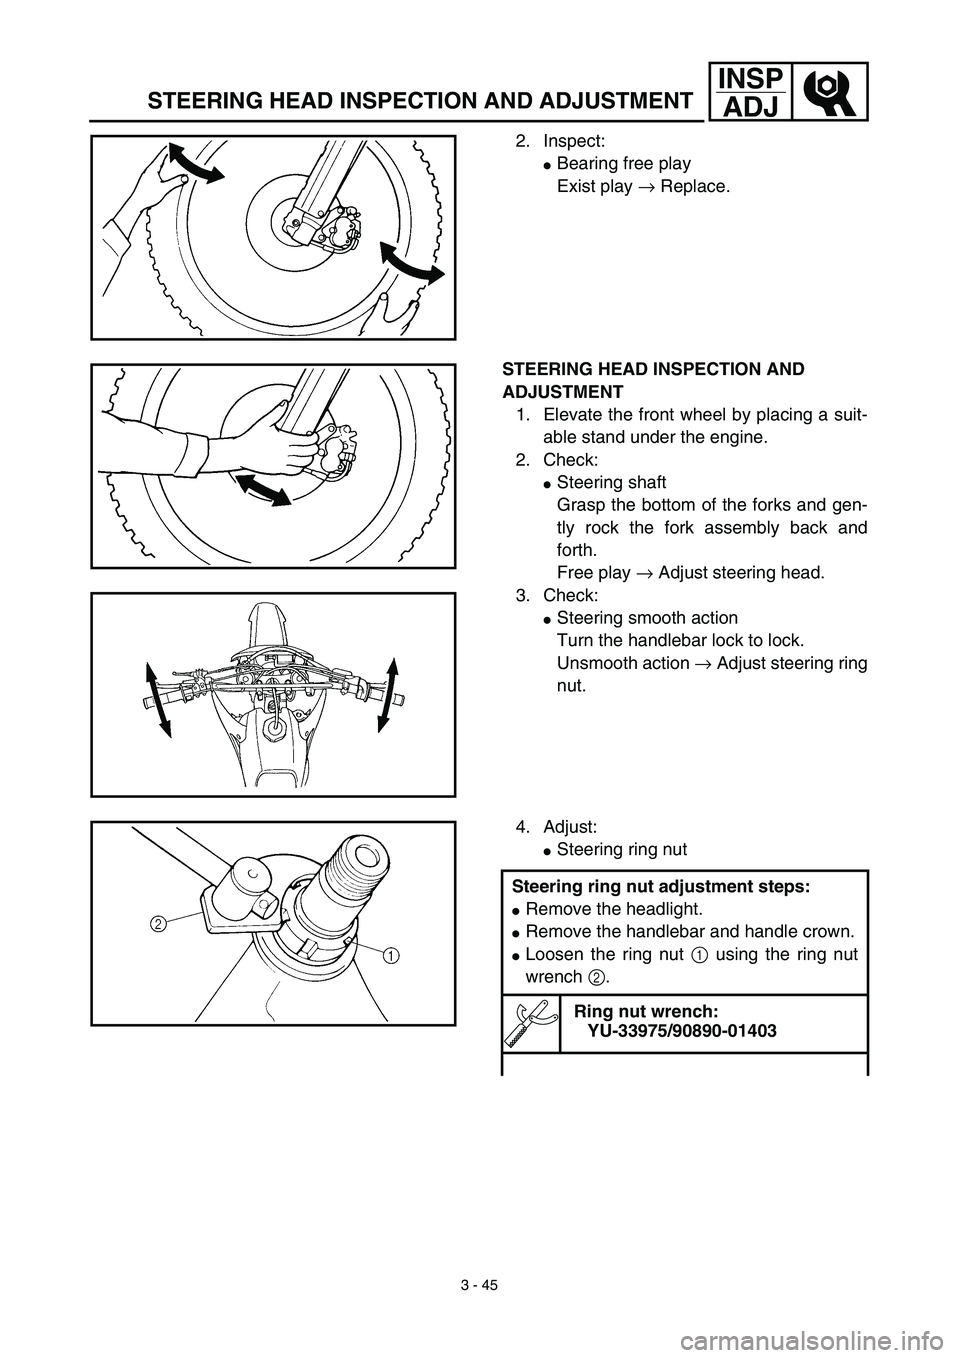 YAMAHA WR 450F 2003  Manuale de Empleo (in Spanish) 3 - 45
INSP
ADJ
STEERING HEAD INSPECTION AND ADJUSTMENT
2. Inspect:
Bearing free play
Exist play → Replace.
STEERING HEAD INSPECTION AND 
ADJUSTMENT
1. Elevate the front wheel by placing a suit-
ab